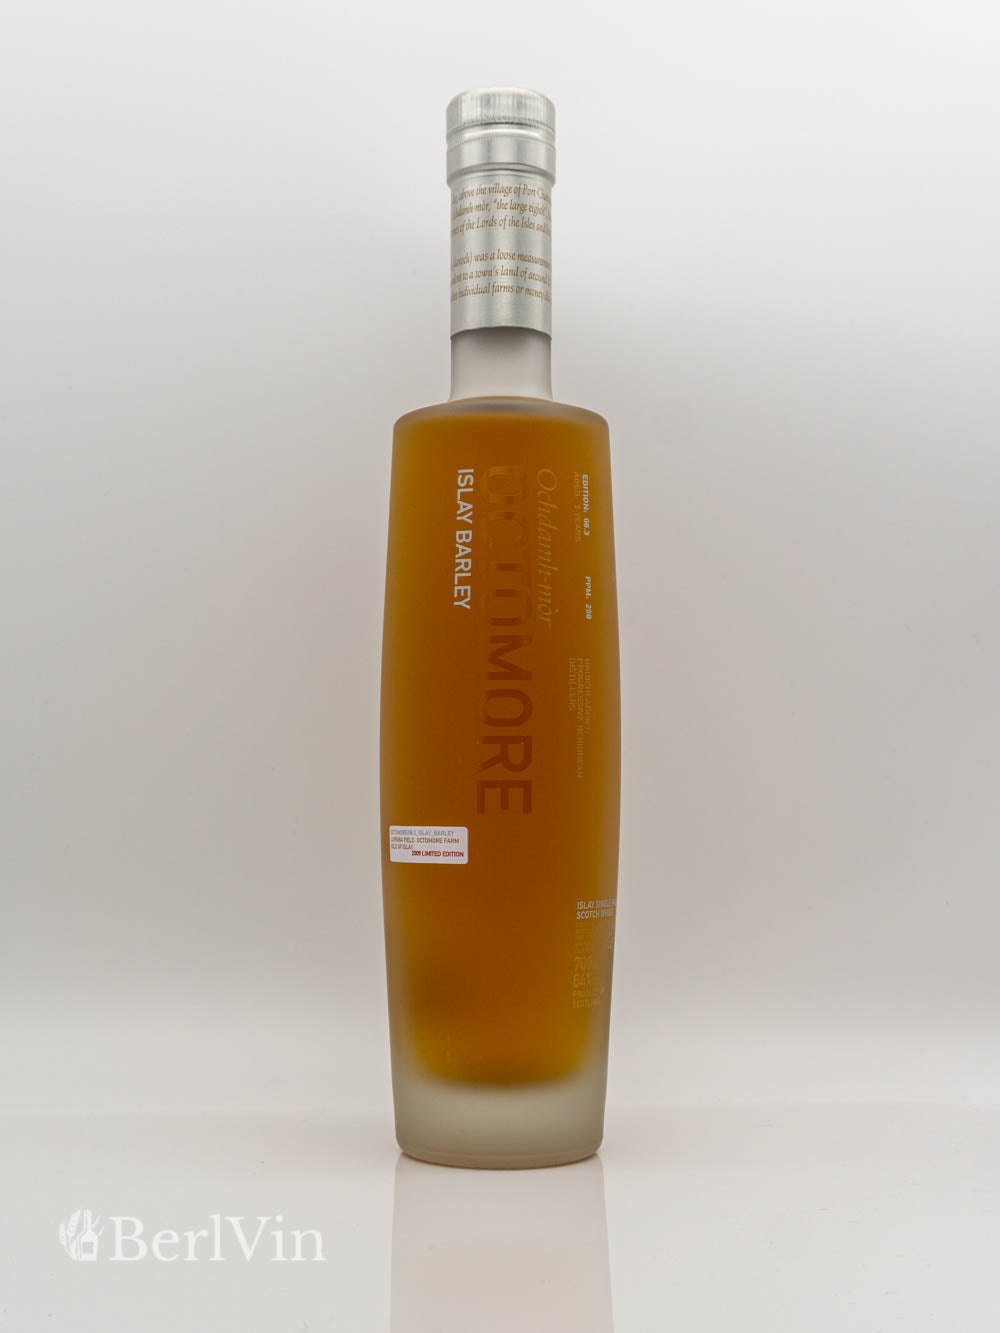 Whisky Bruichladdich Octomore 06.3 Islay Single Malt Scotch Whisky Frontansicht